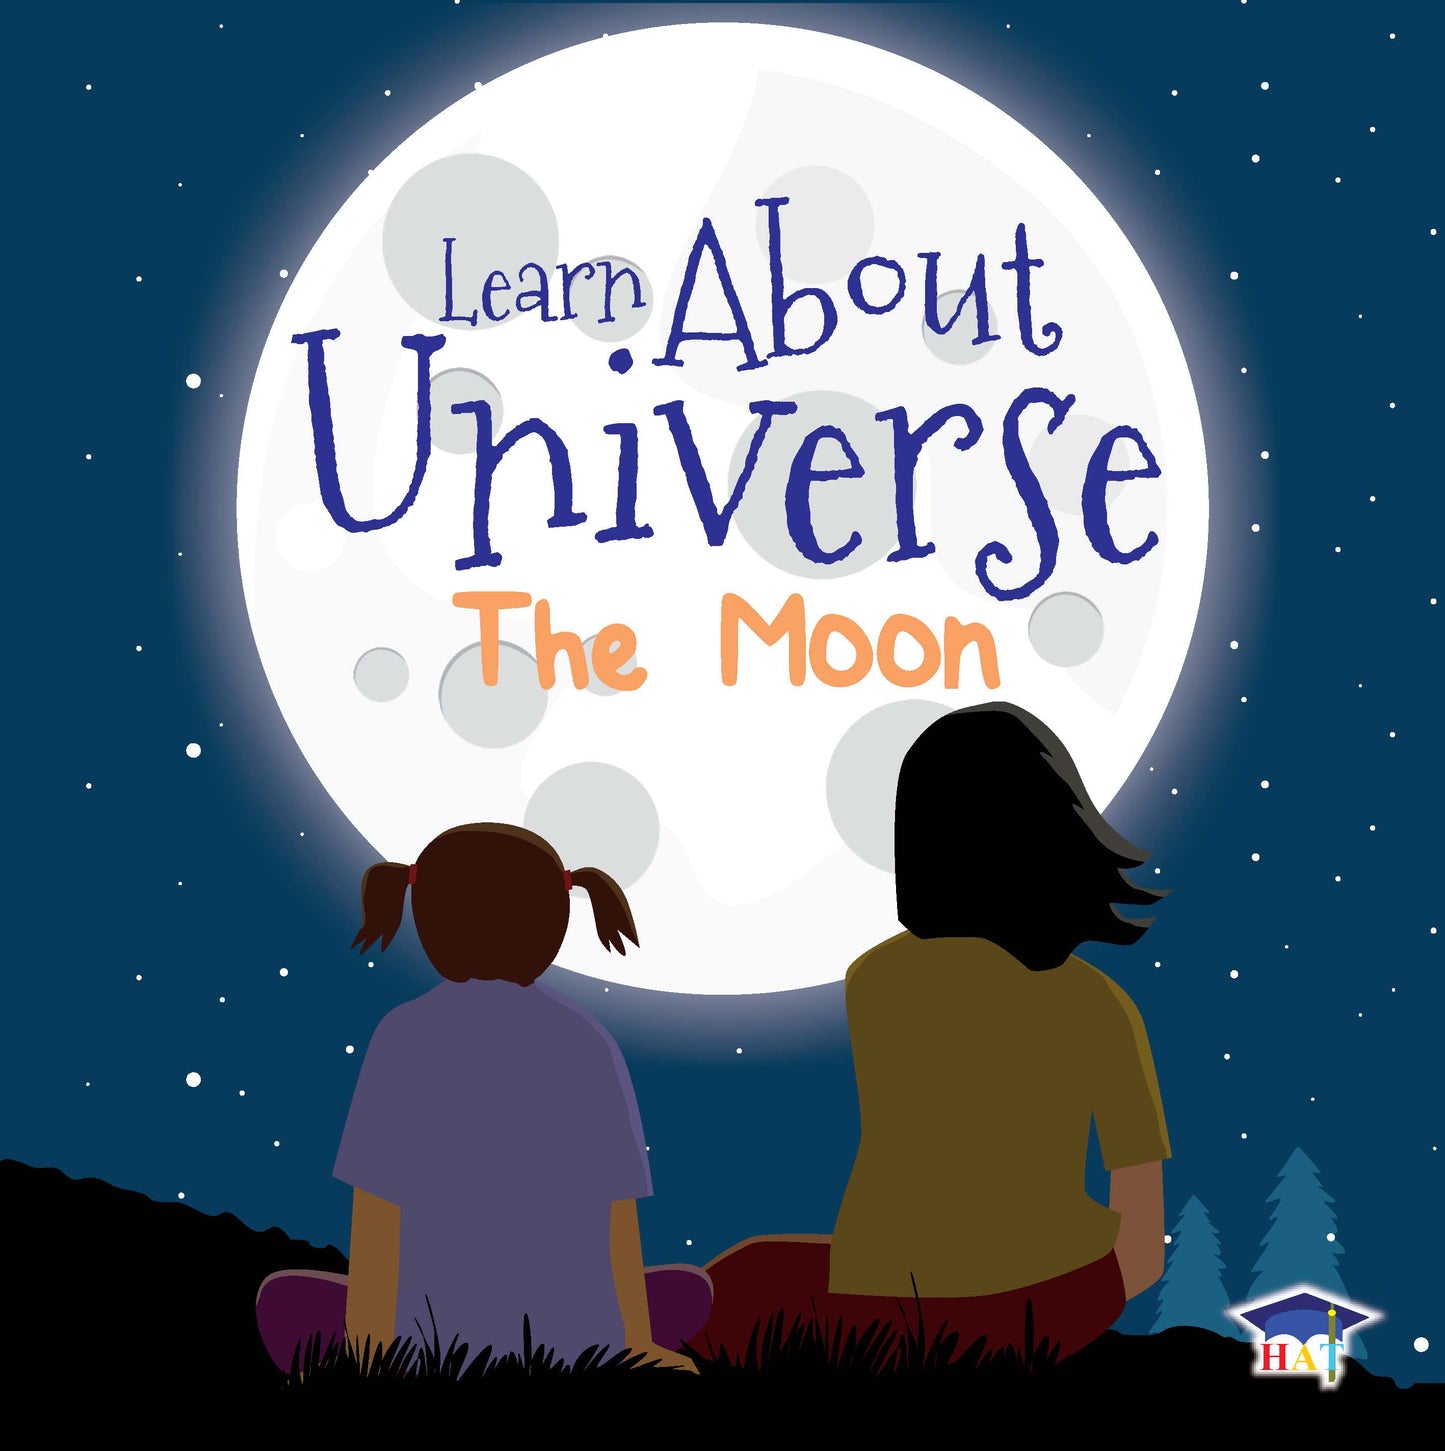 Learn About Universe - 4 Books